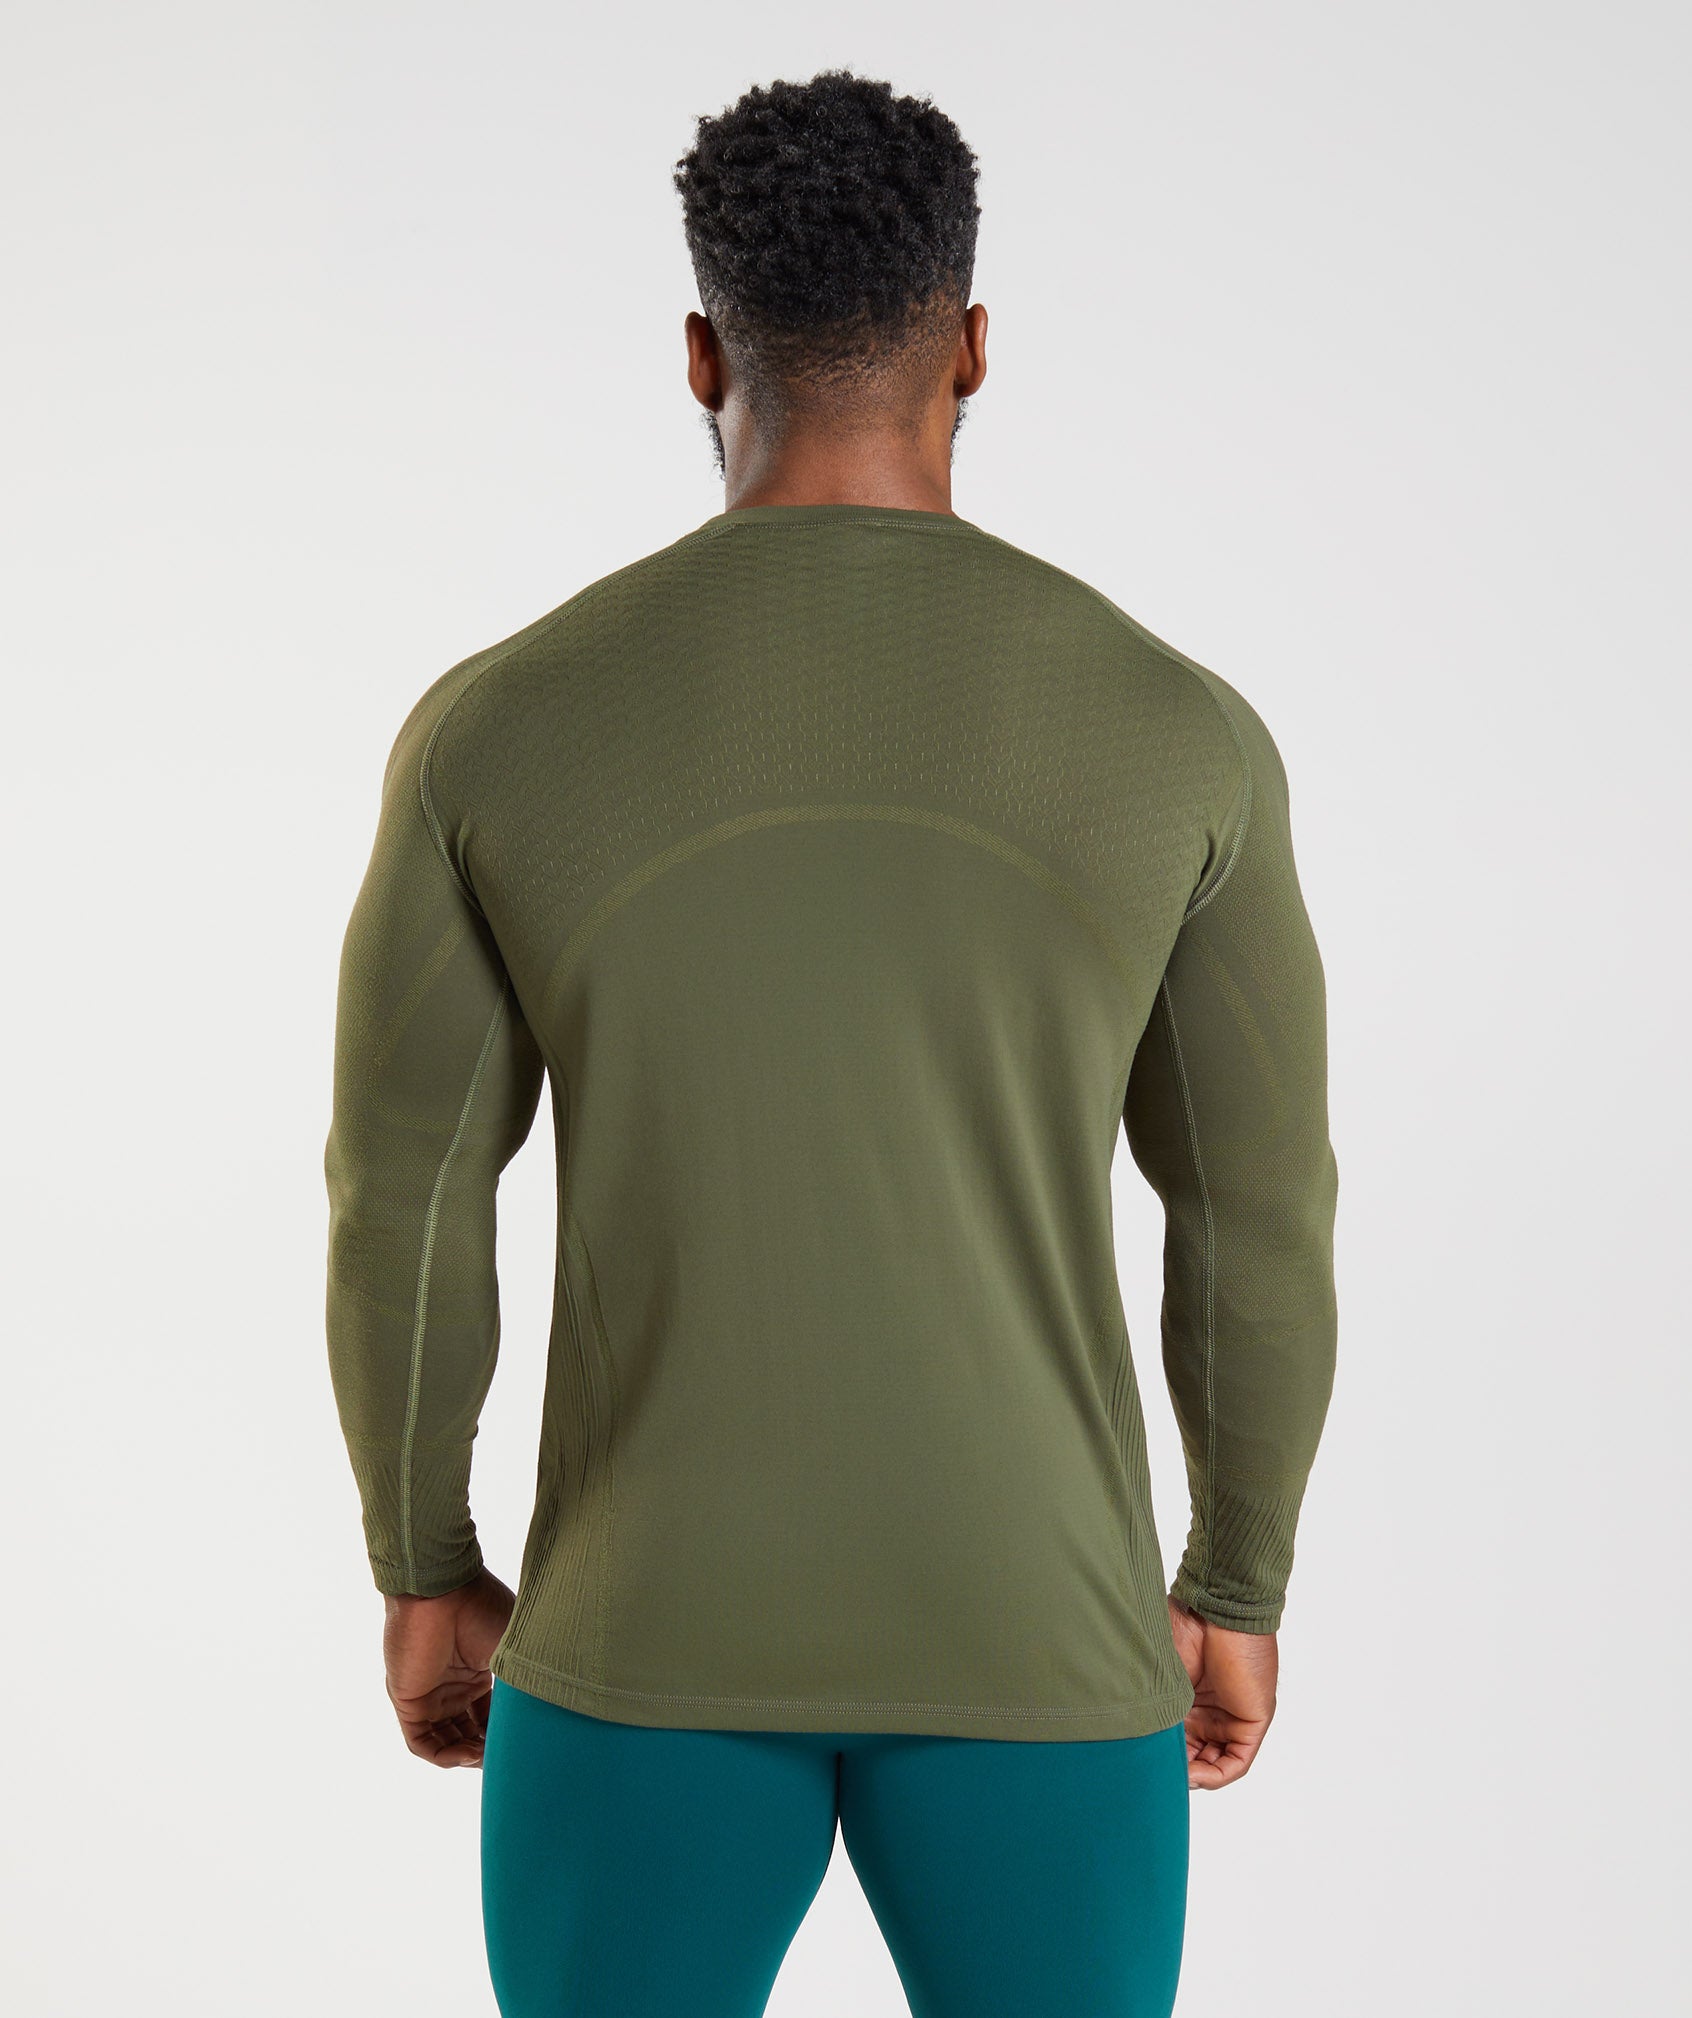 315 Long Sleeve T-Shirt in Core Olive/Marsh Green - view 2